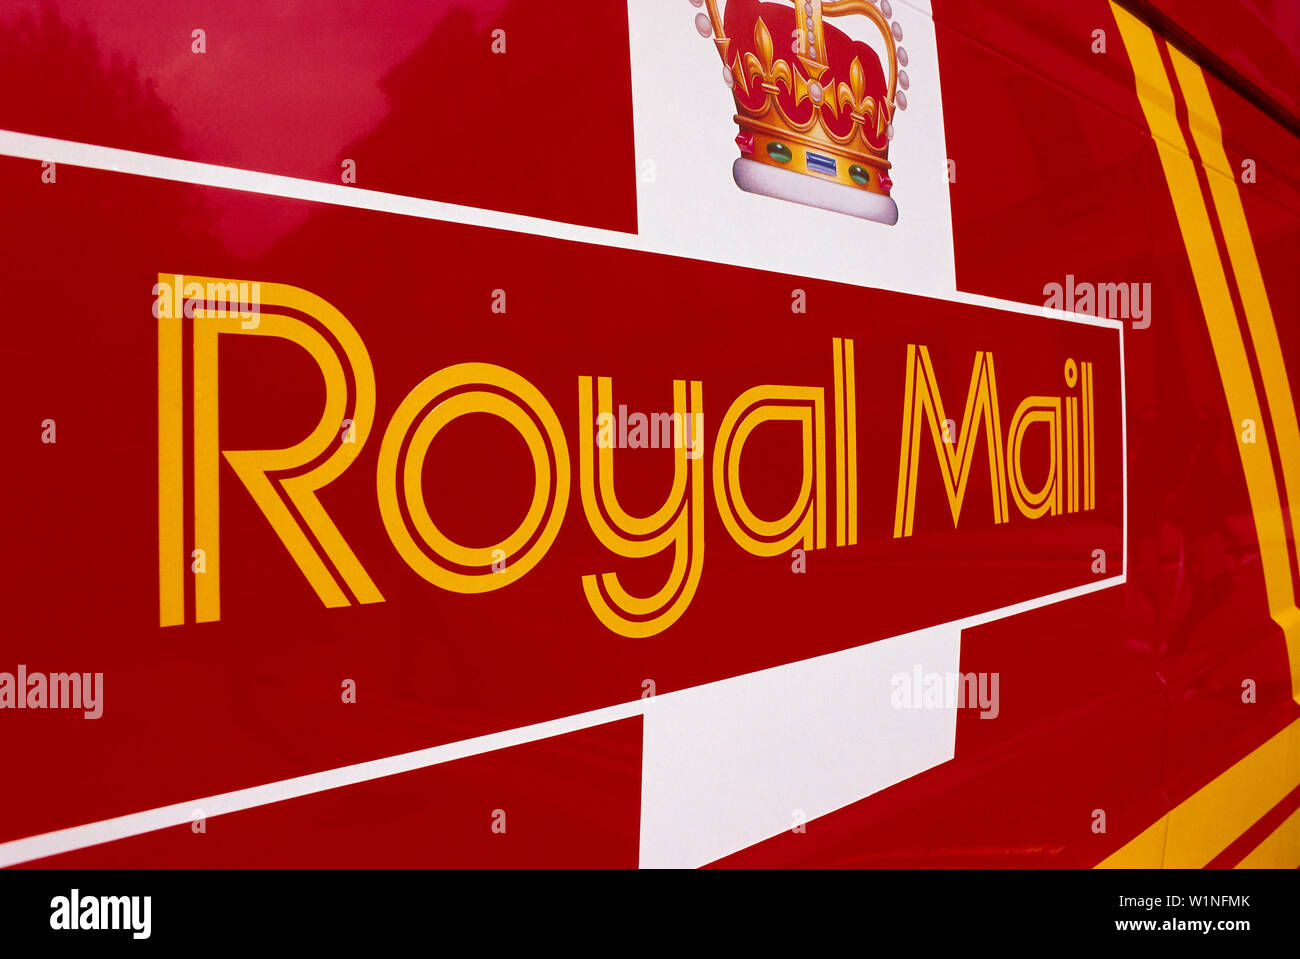 Royal Mail red, London, England Great Britain Stock Photo